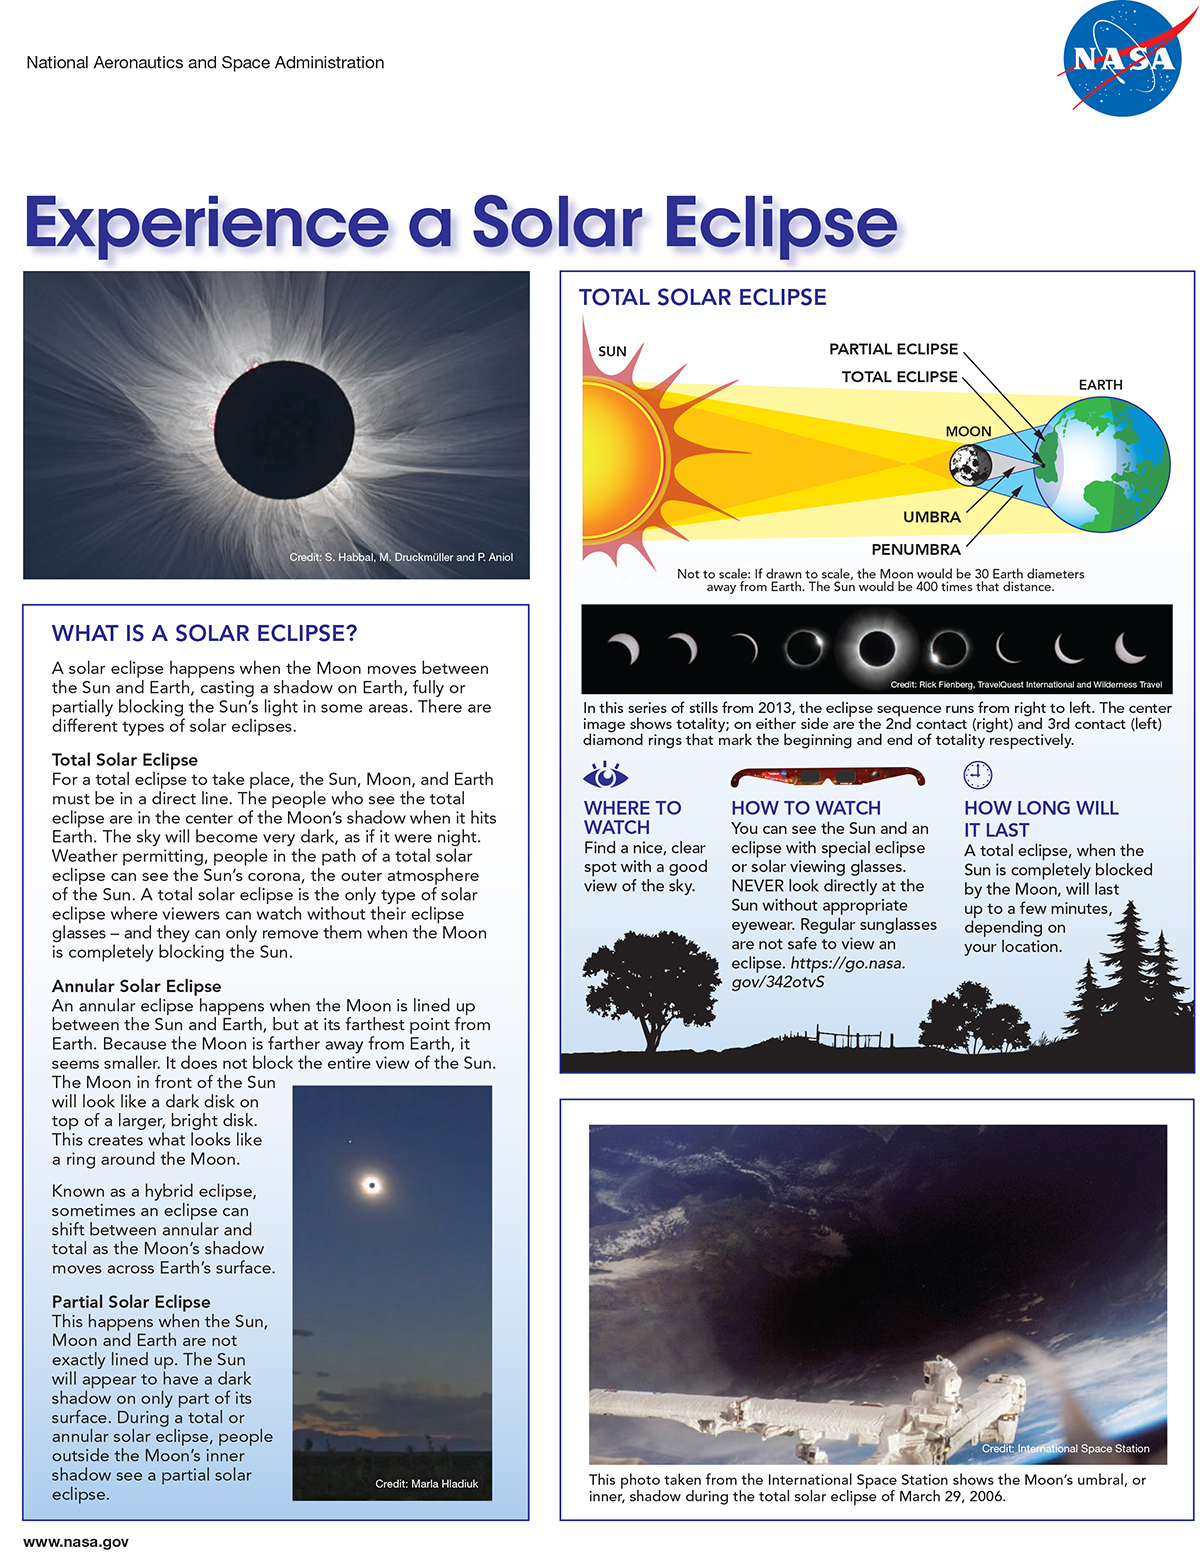 Experience a Solar Eclipse flyer